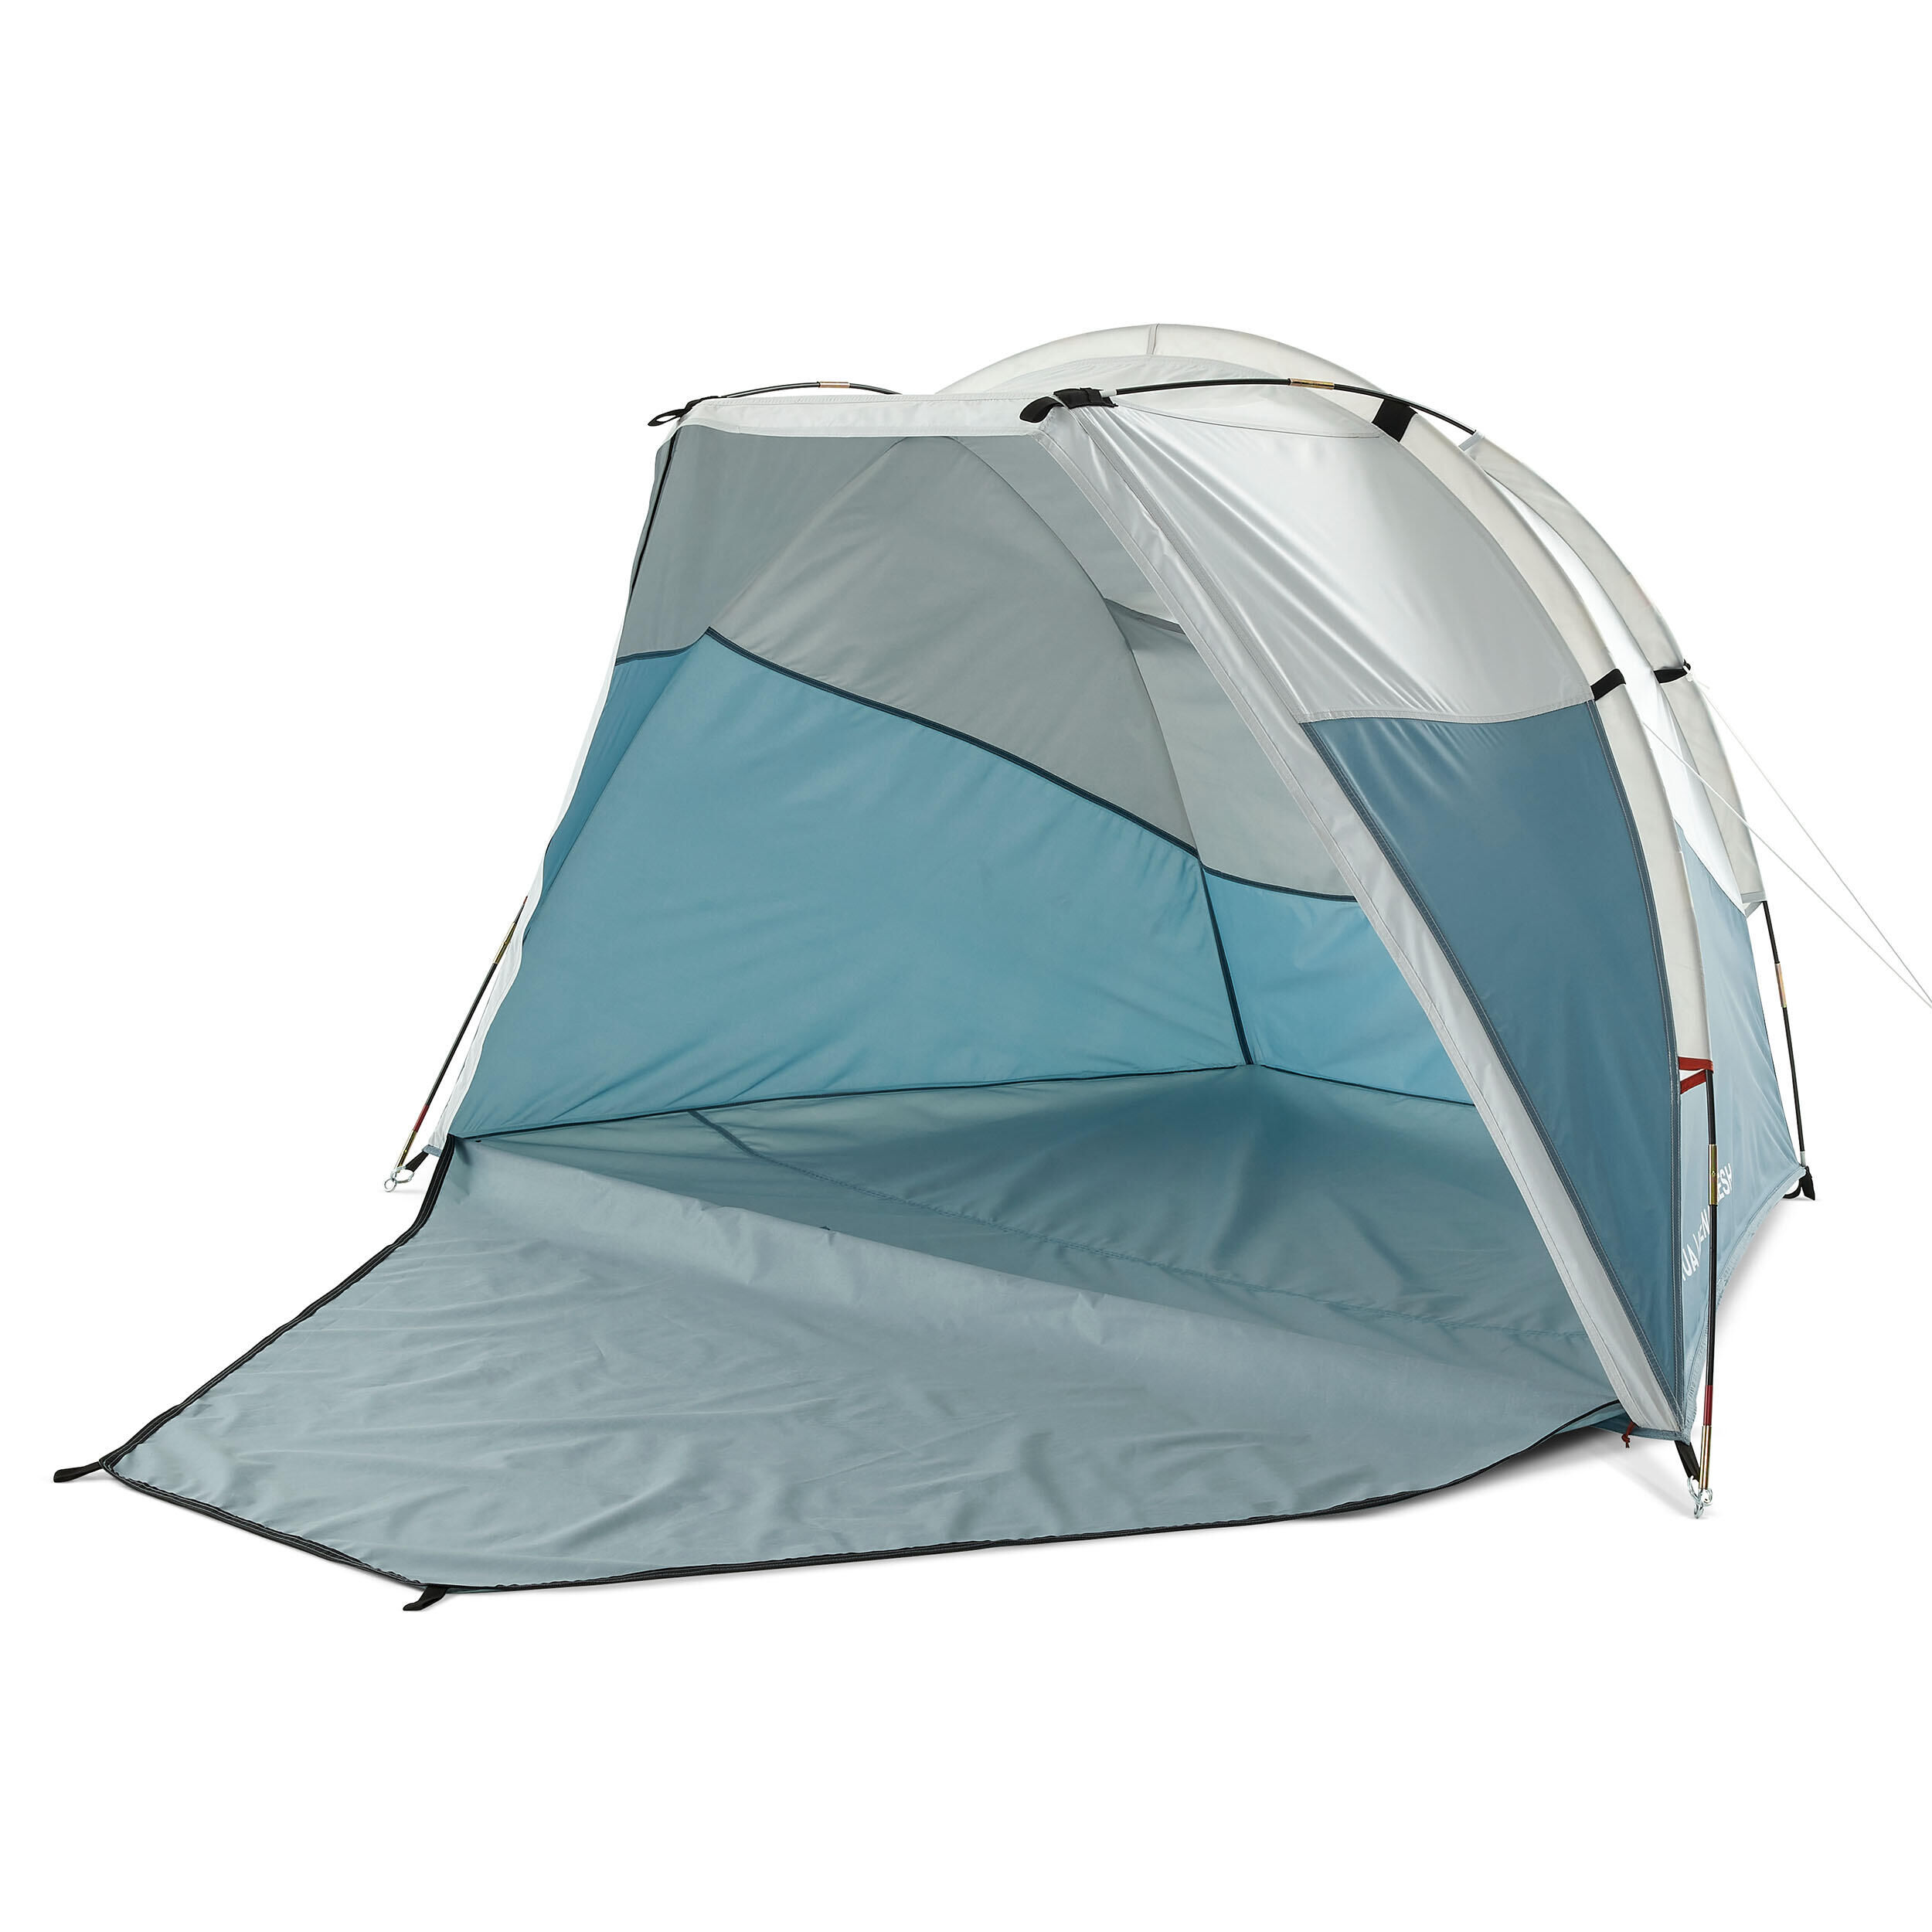 QUECHUA Camping Shelter (with tent poles) Arpenaz 0 XL Fresh Compact 2-Person